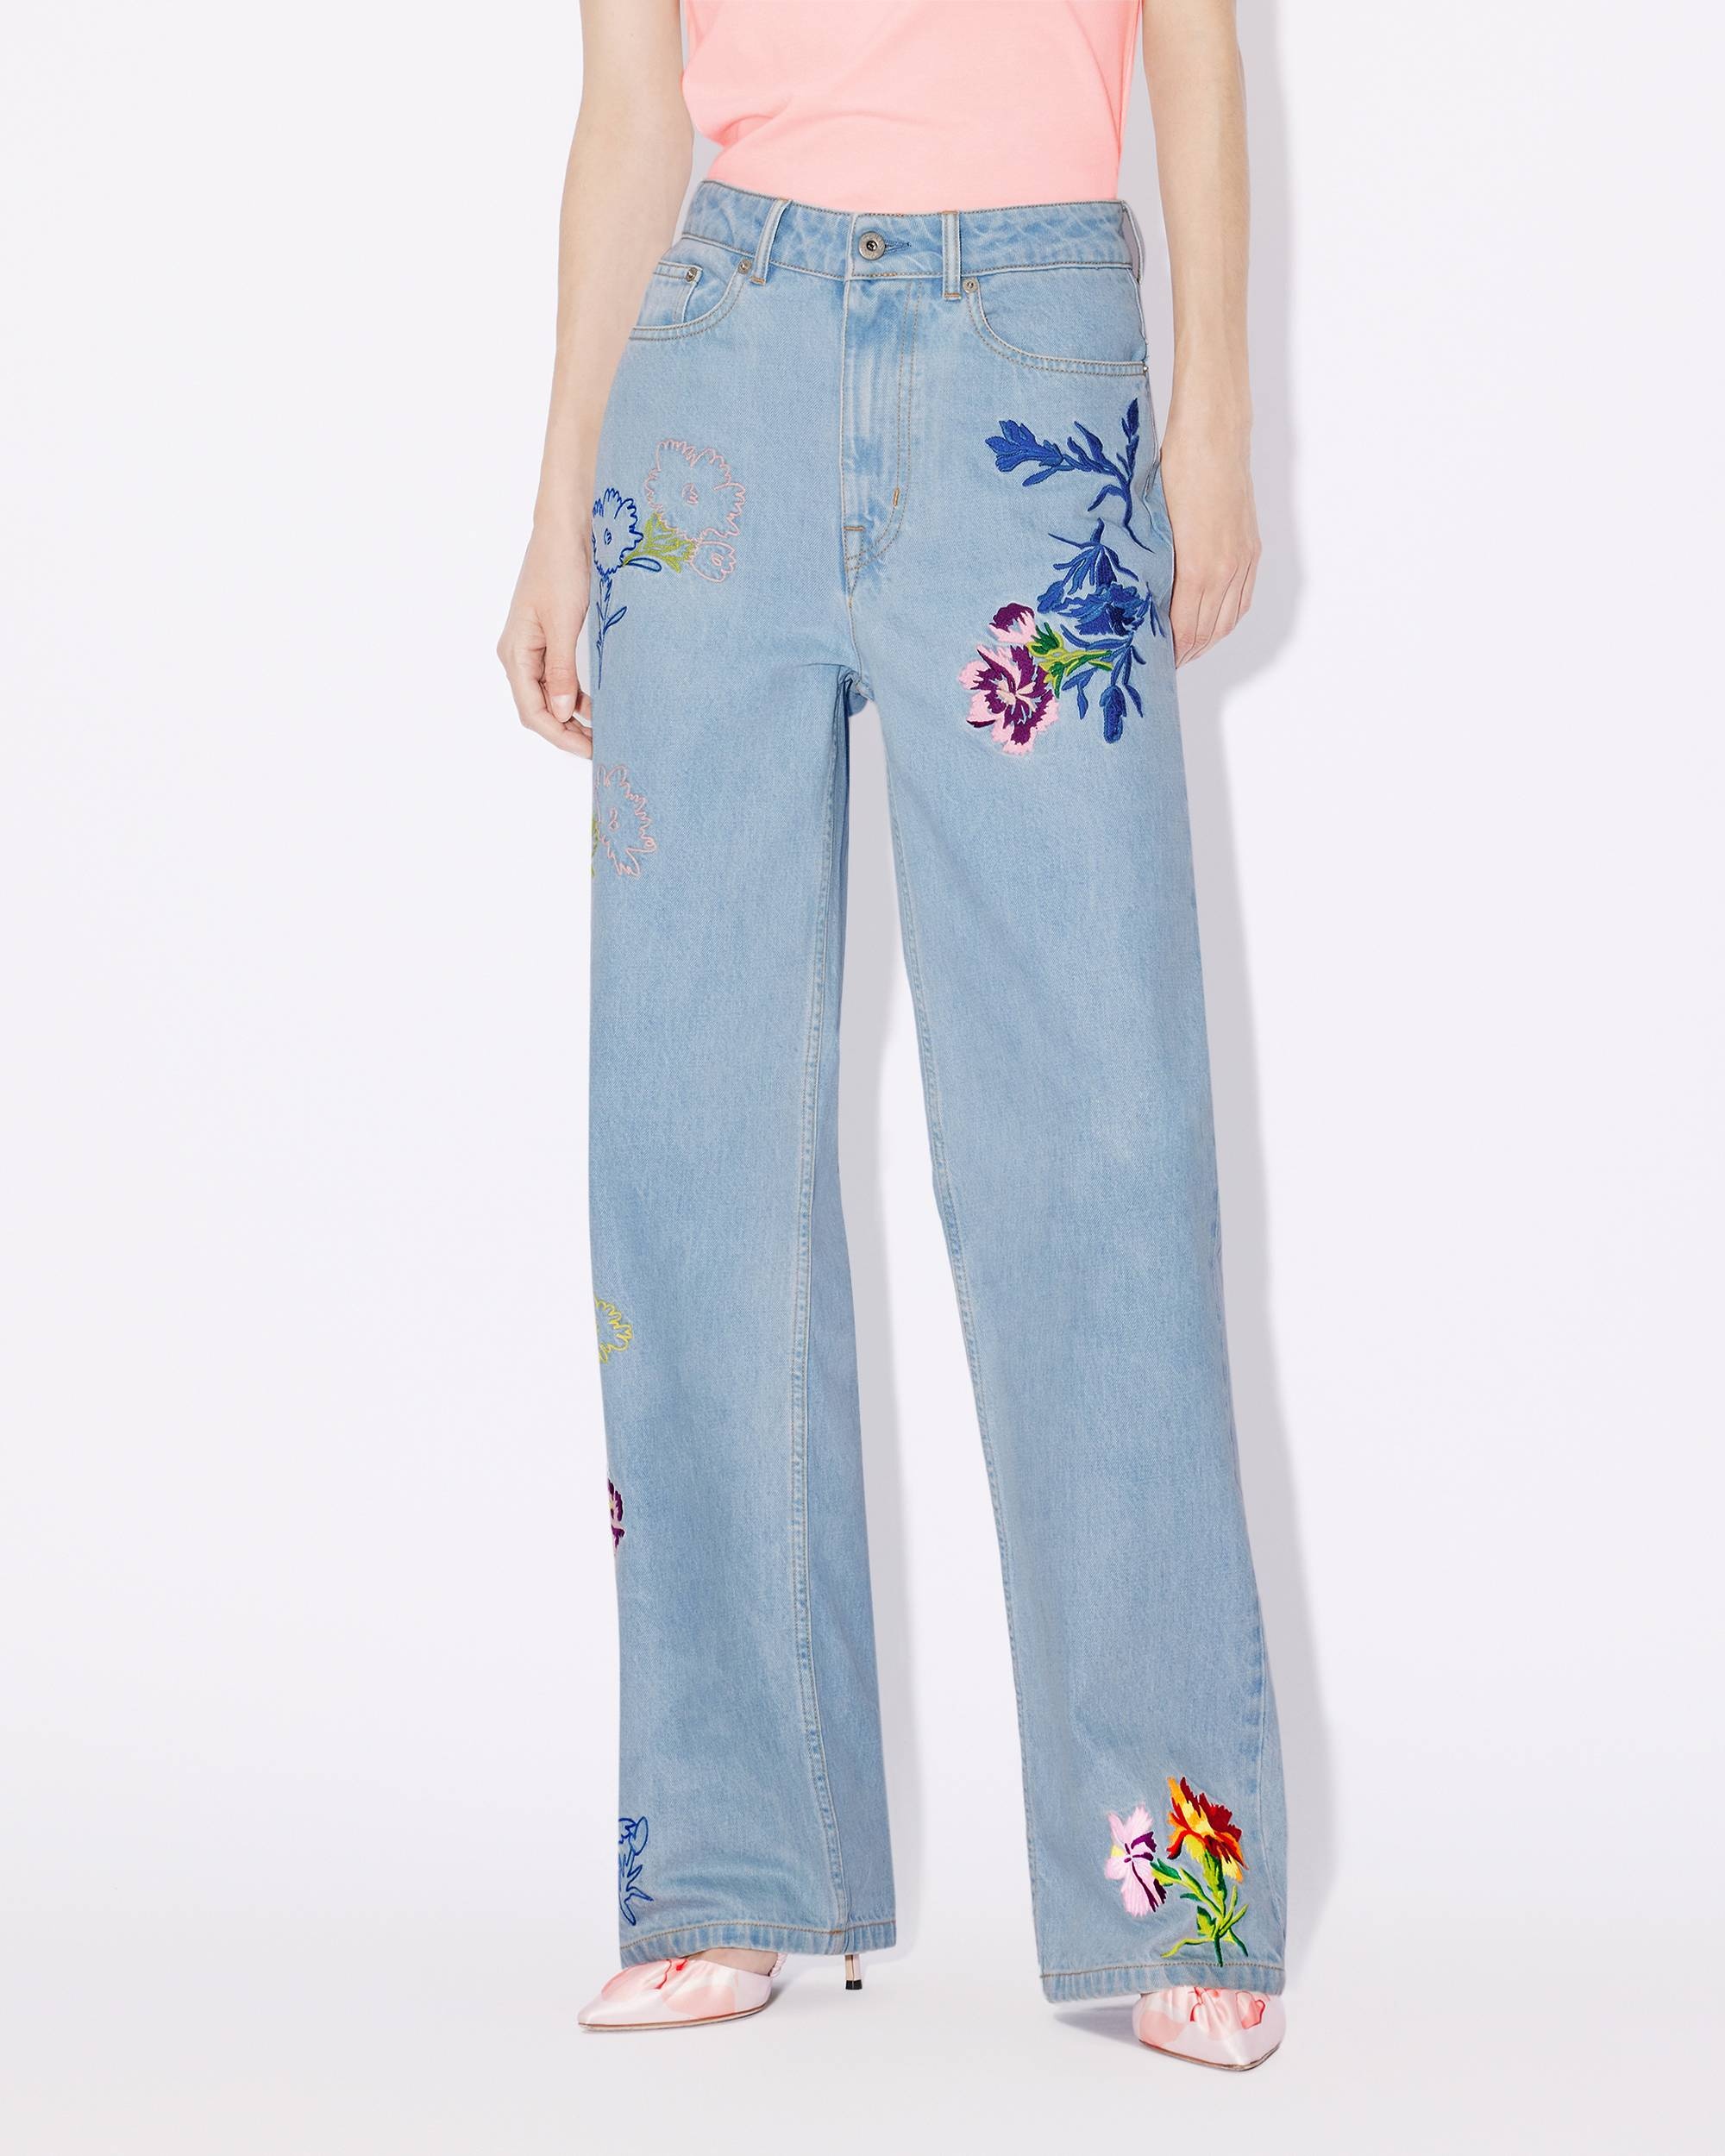 Sumire 'KENZO Drawn Flowers' embroidered cropped jeans - 4